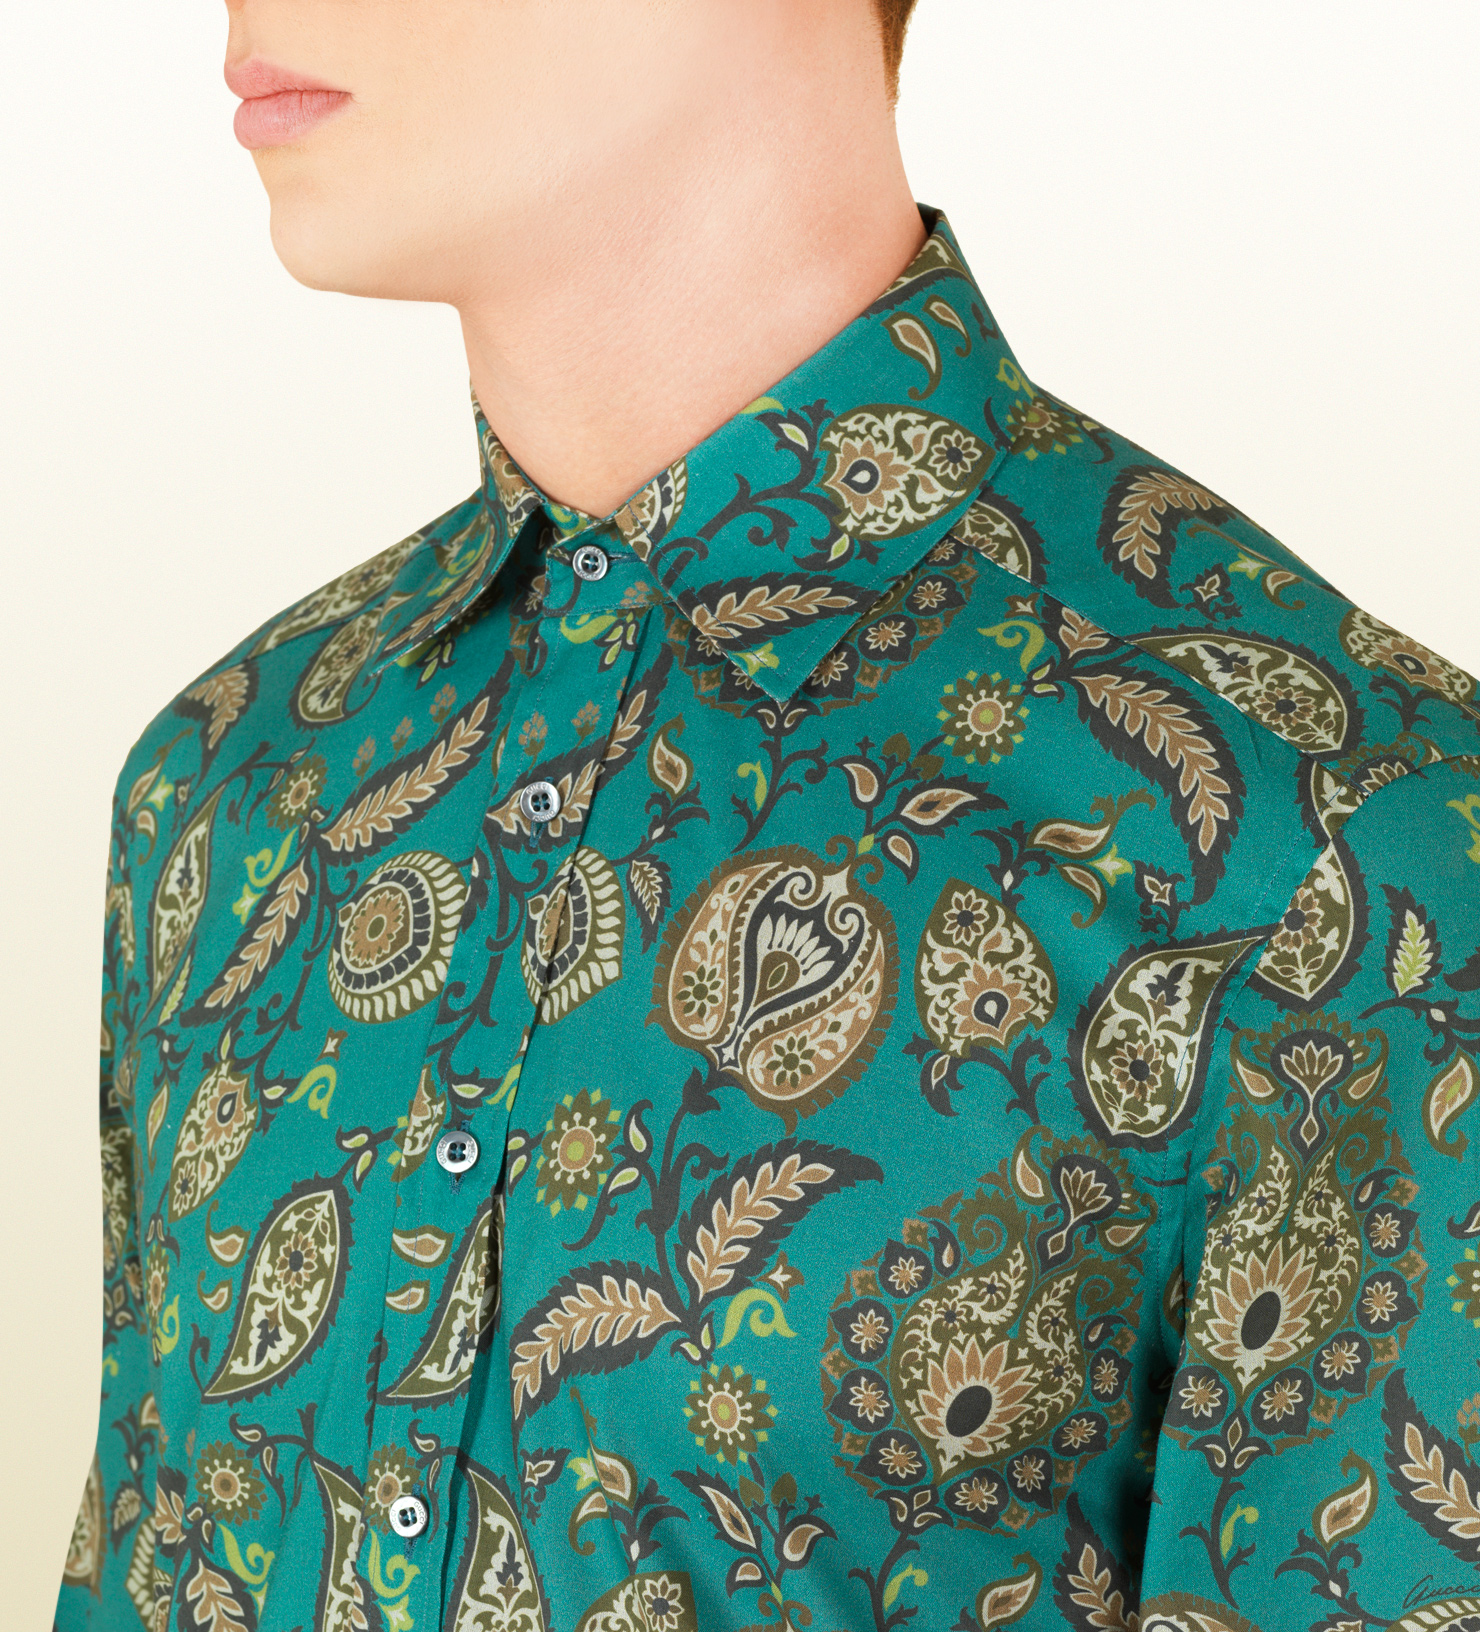 Gucci Paisley Print Fitted Shirt in Green for Men - Lyst